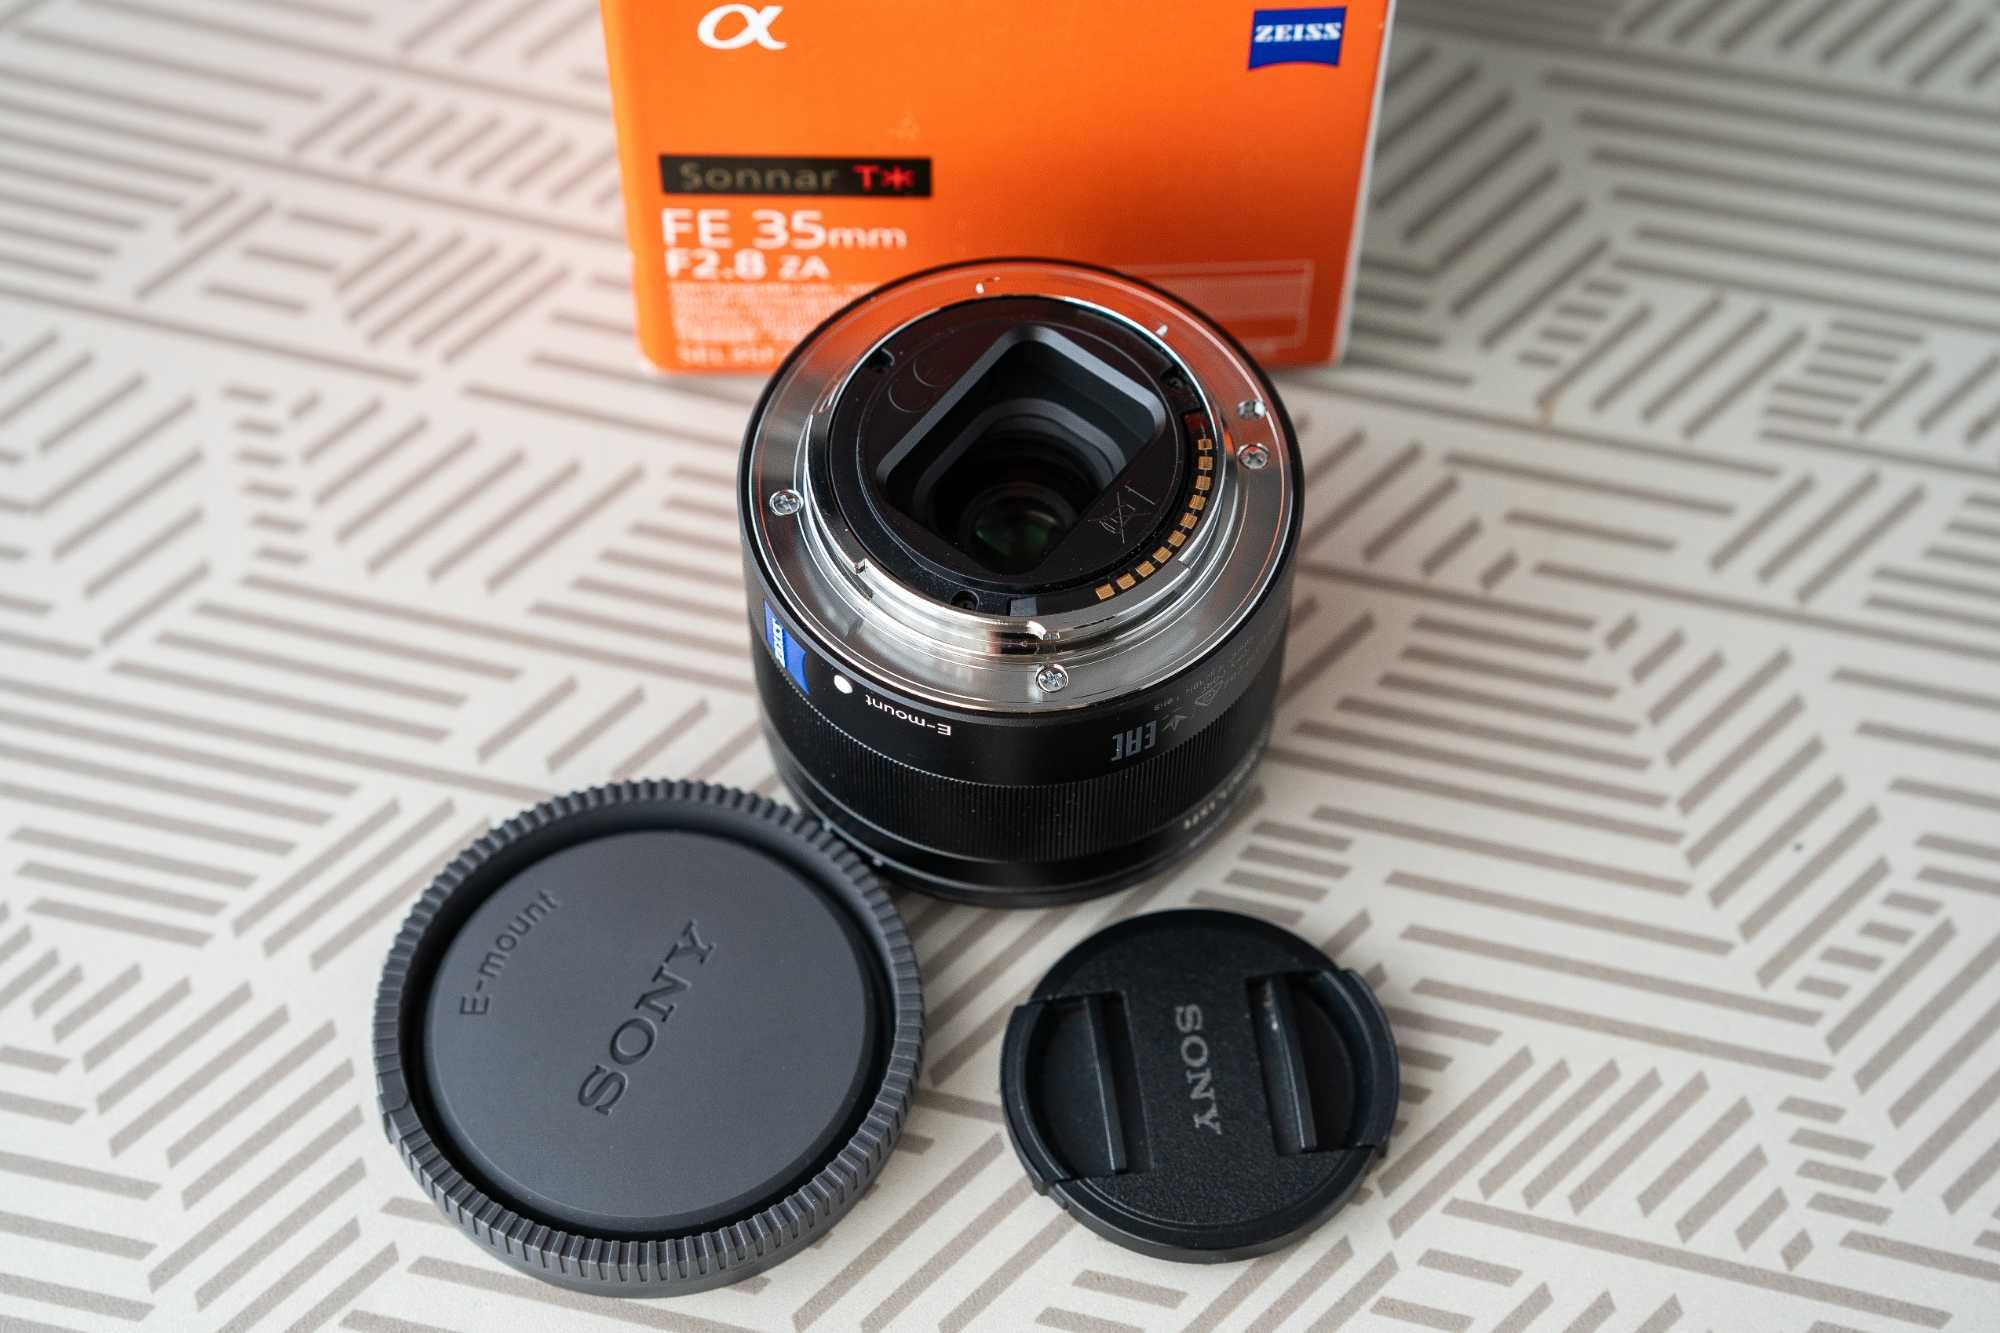 Sony Zeiss Sonnar T* FE 35 mm f/2.8 ZA